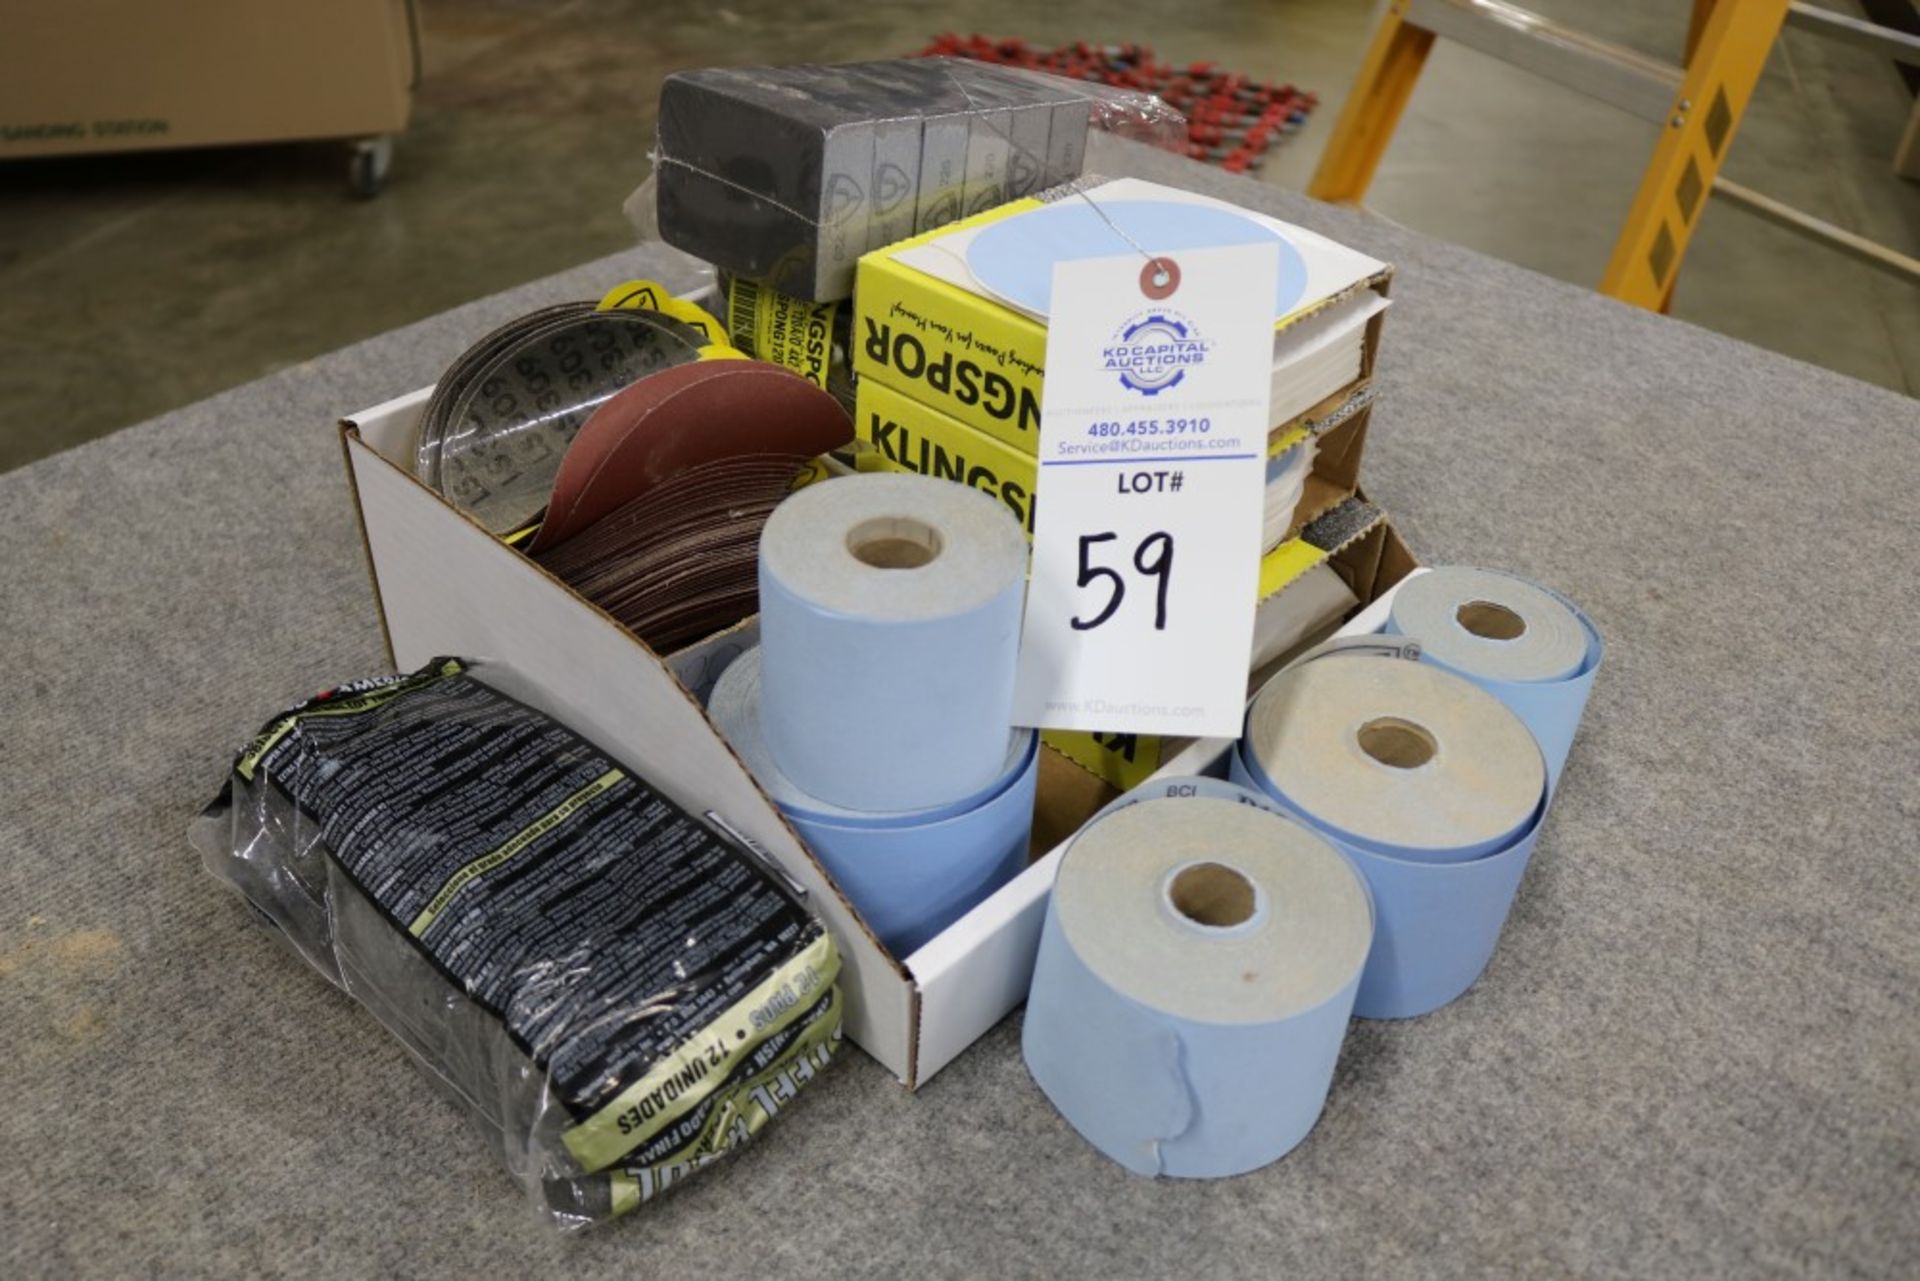 Brand New Box of Sand Paper Rolls and Replacement Orbital Sand Paper Pads and Sand Paper Sponges, - Image 5 of 5